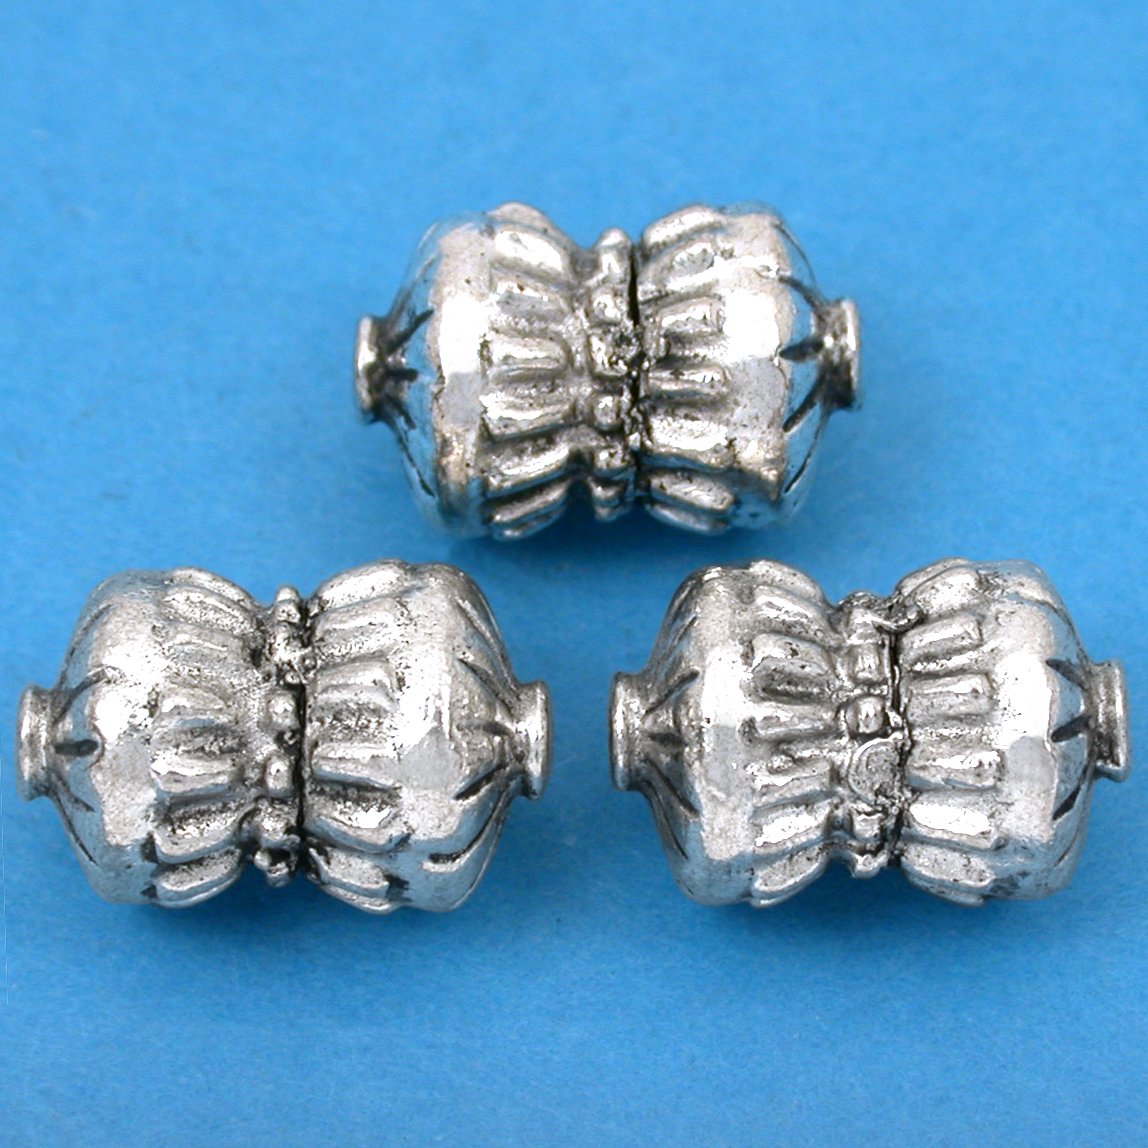 Bali Barrel Antique Silver Plated Beads 17mm 19 Grams 3Pcs Approx.